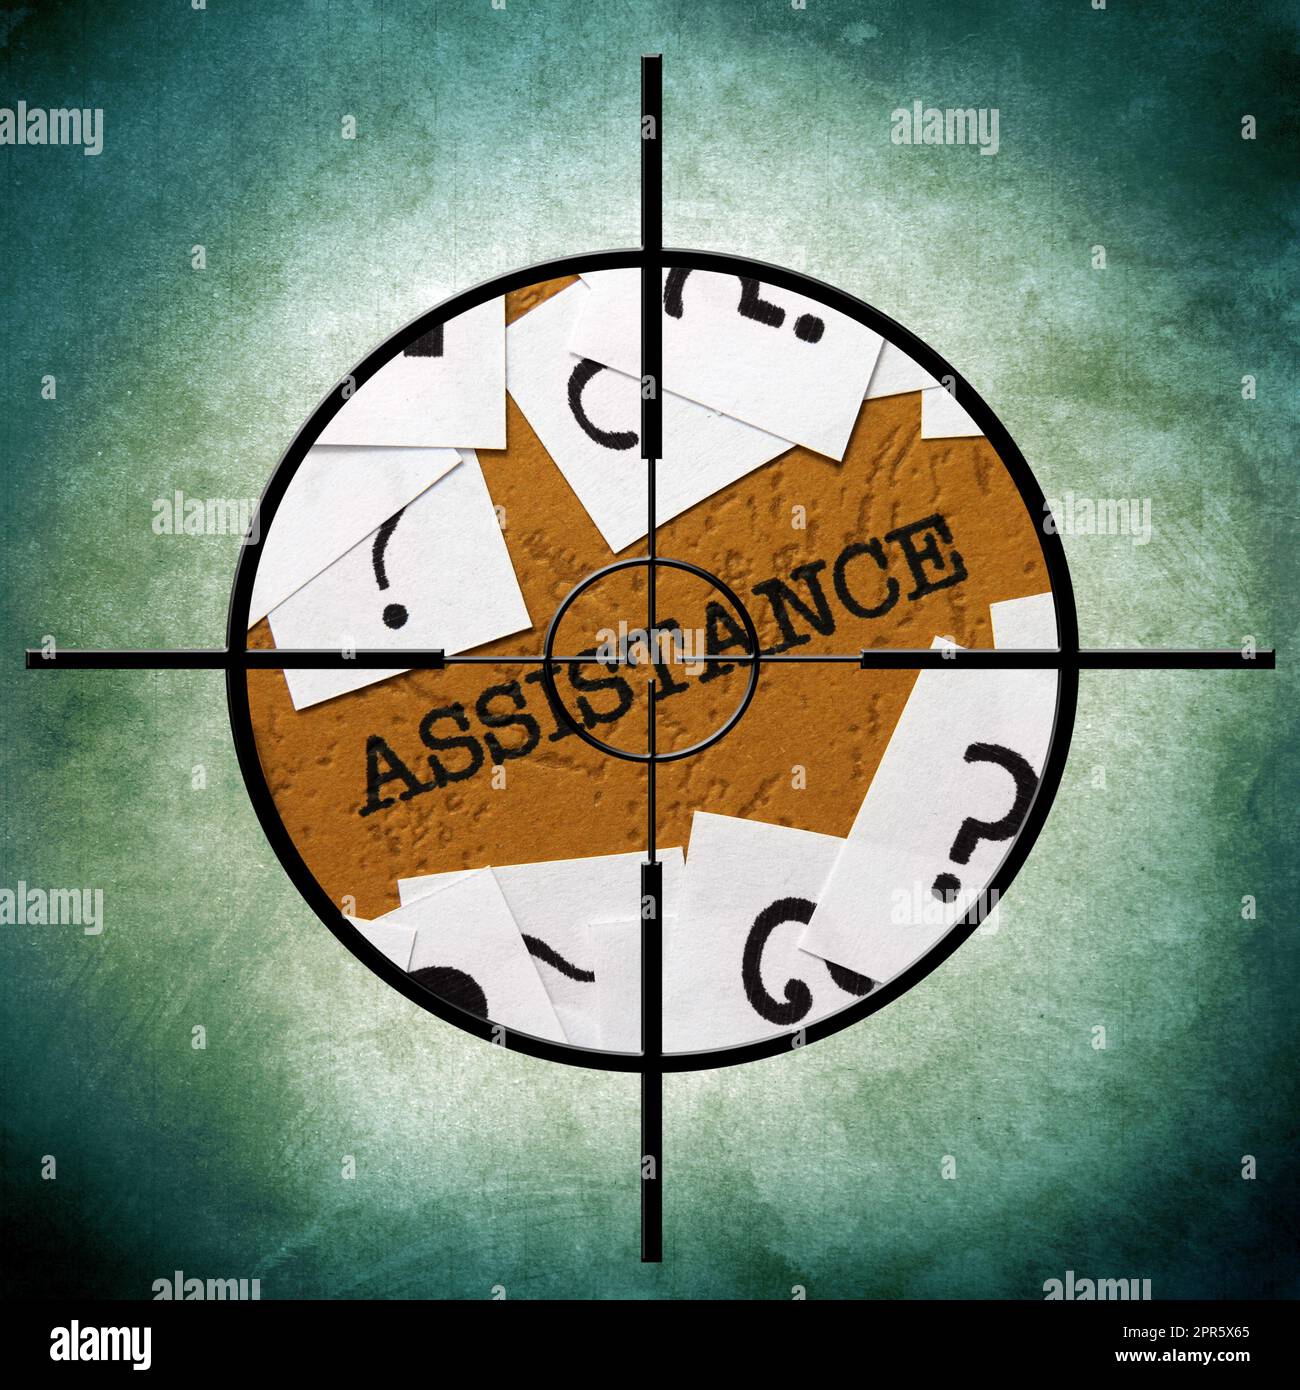 Assistance target Stock Photo